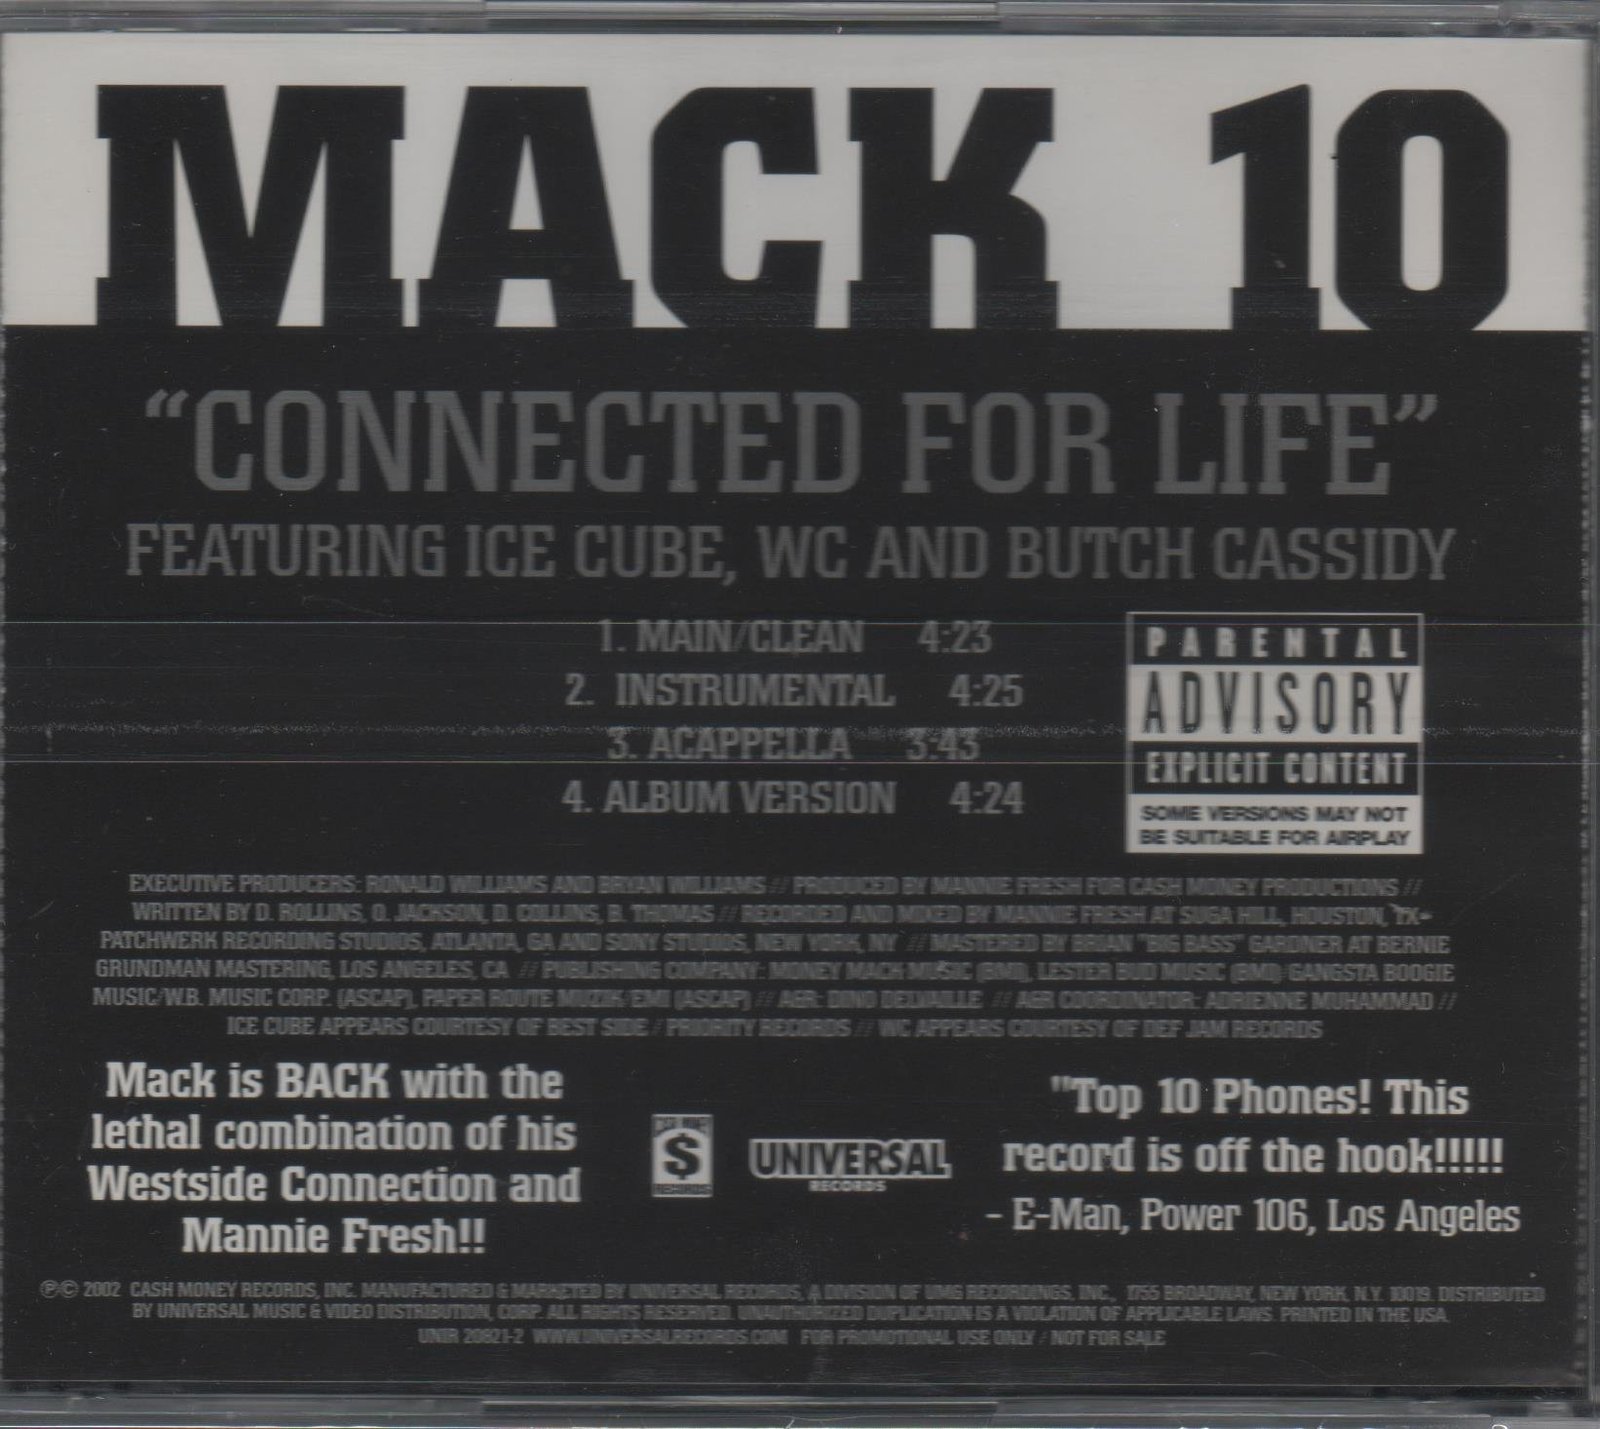 Connected for Life [Audio CD] mack 10